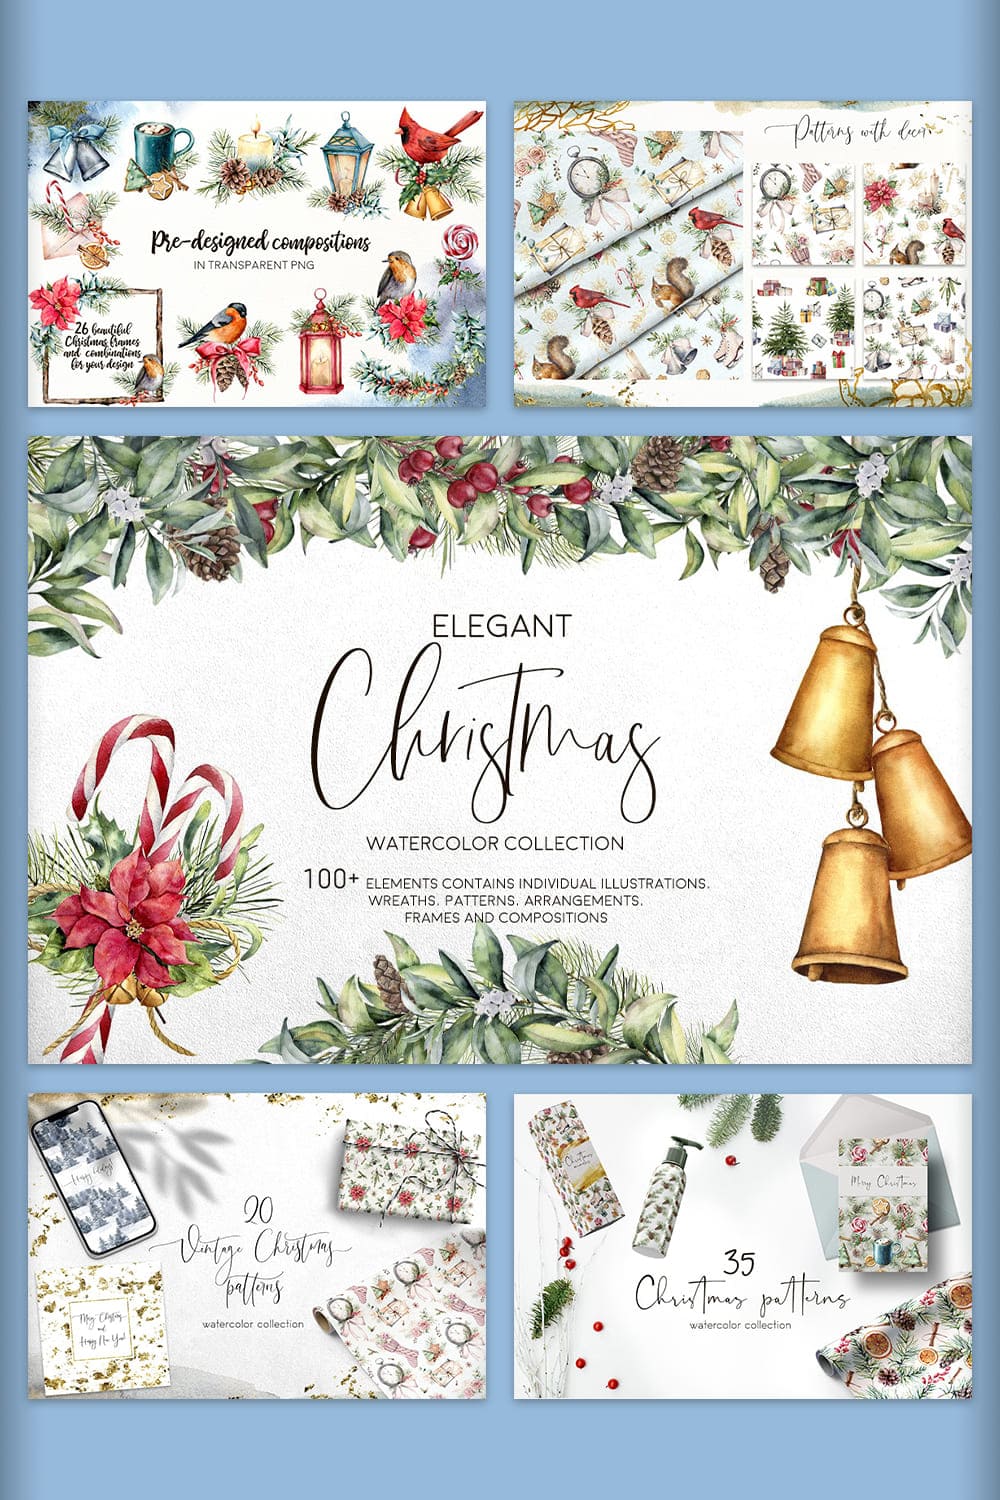 Five Pictures Of Elegant Christmas Watercolor Collection.